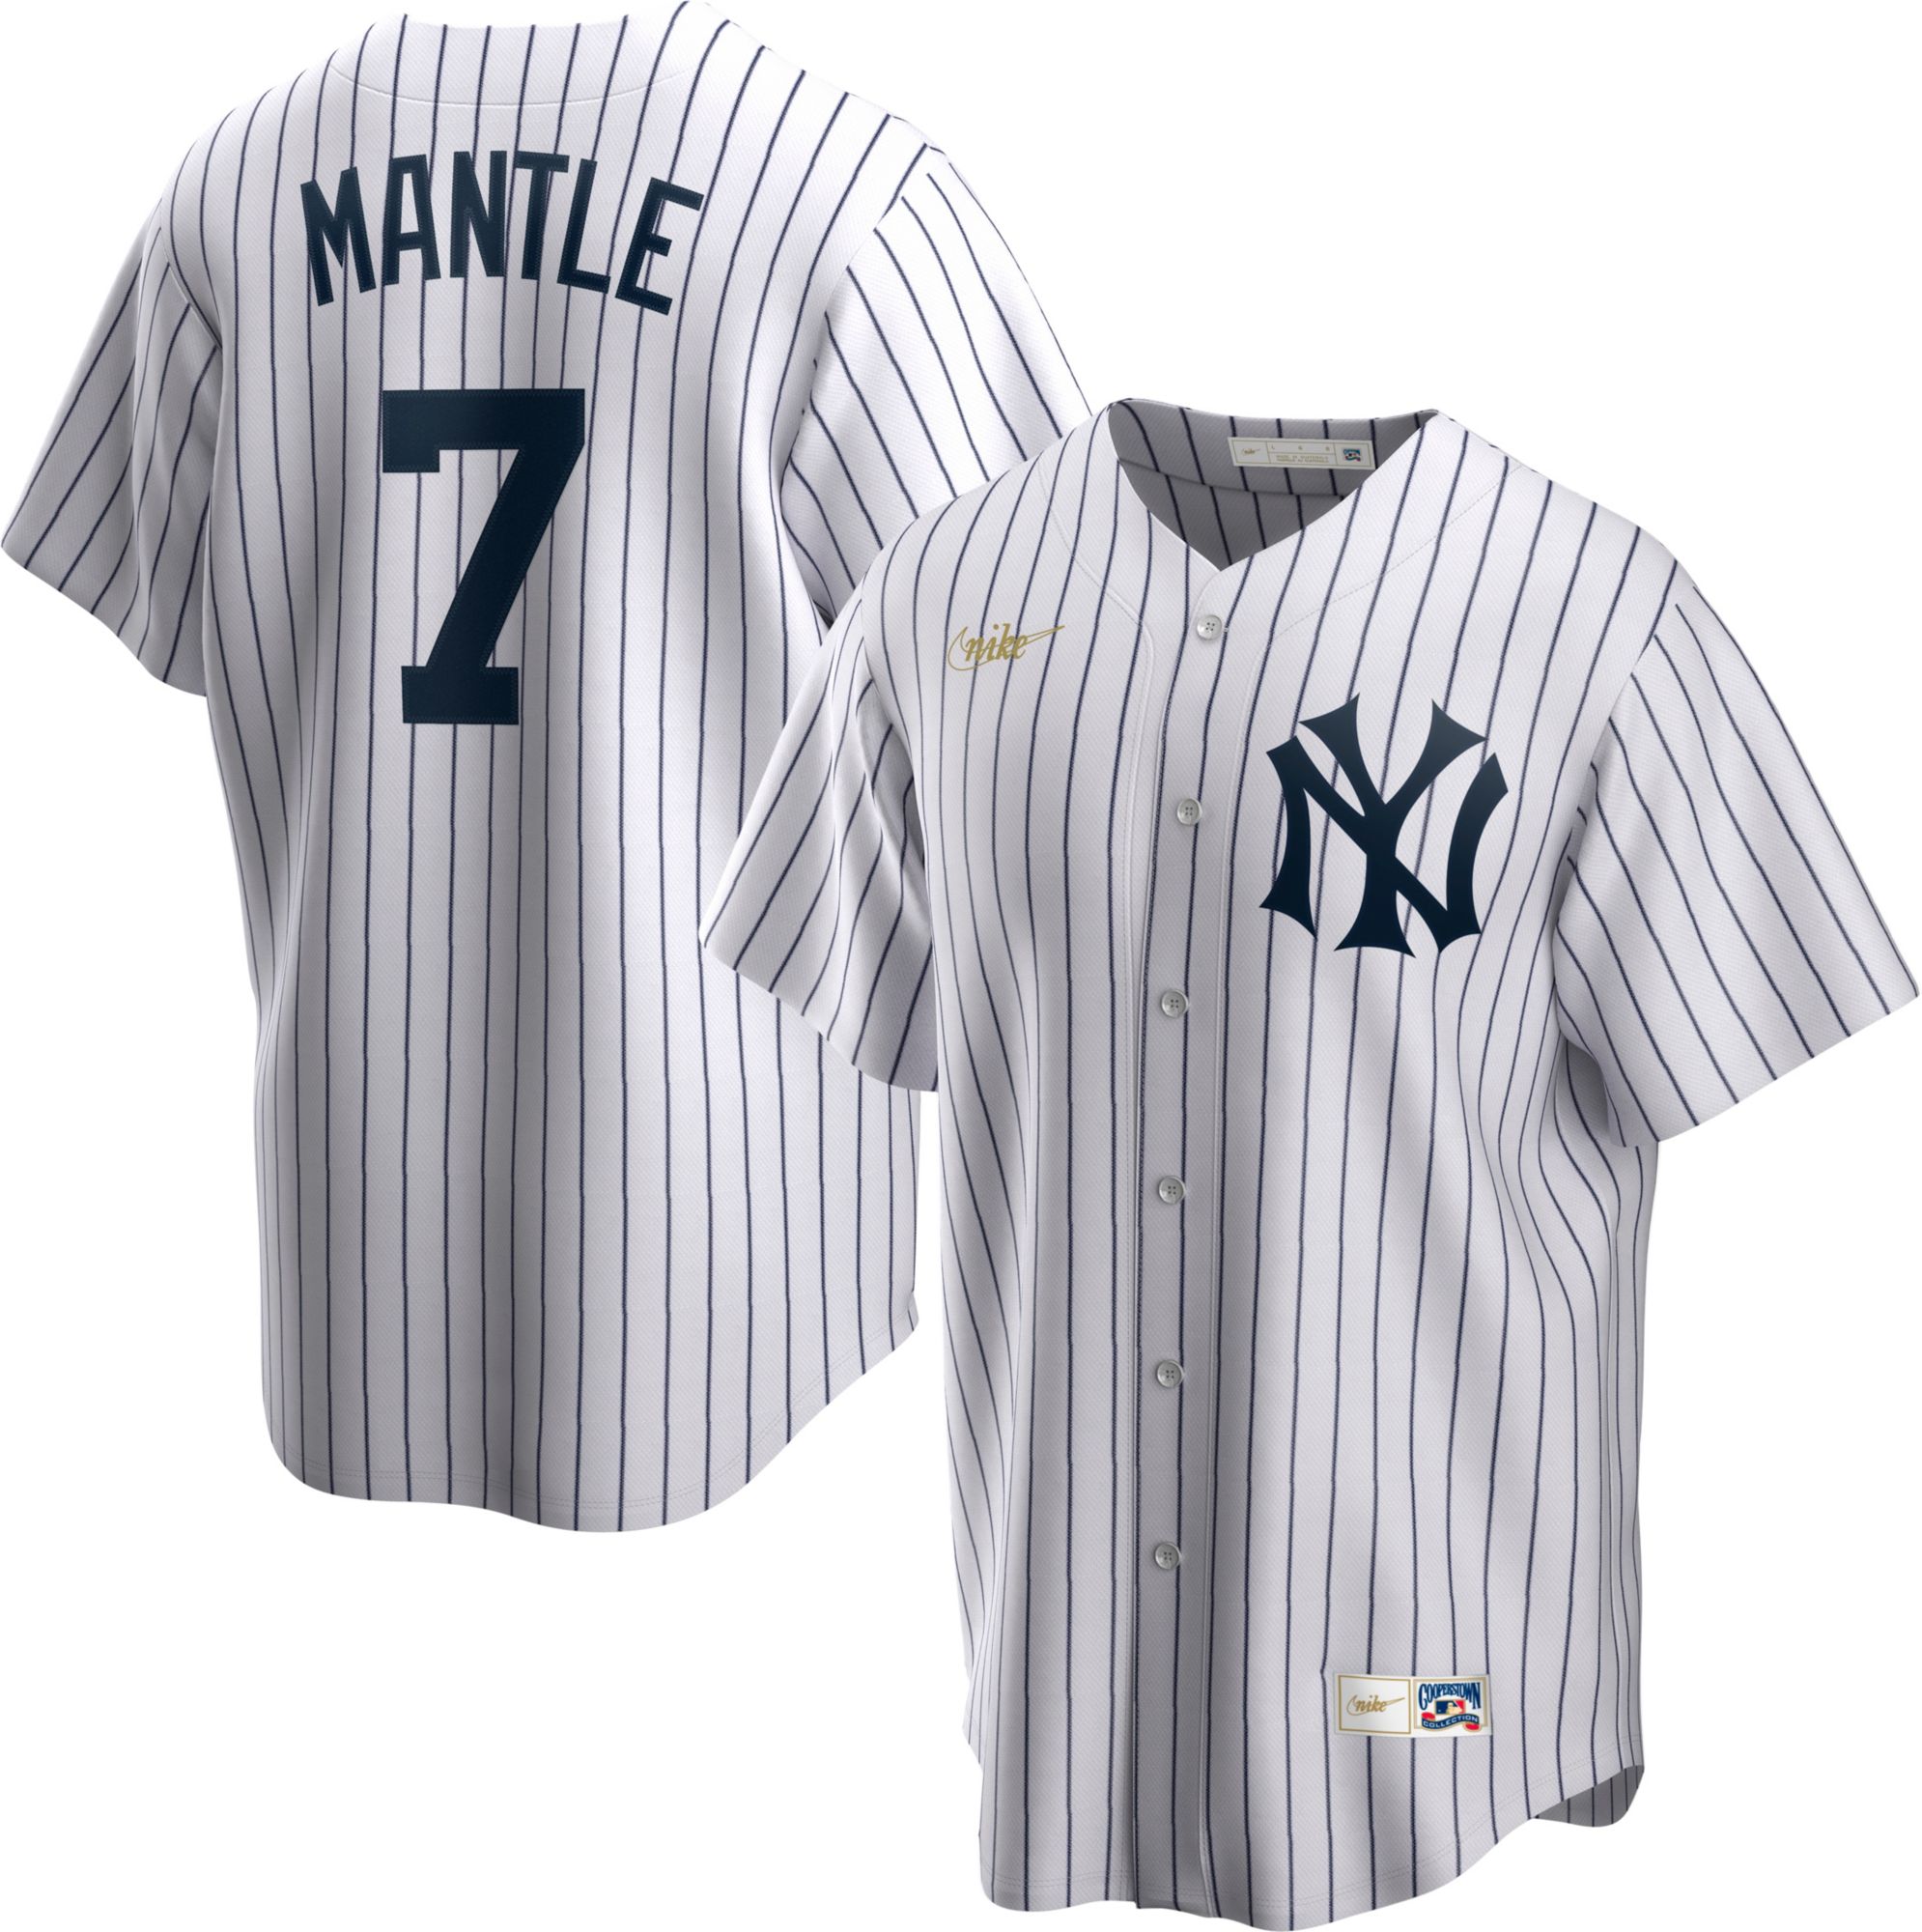 Giancarlo Stanton New York Yankees Fanatics Authentic Game-Used #27 White  Pinstripe Jersey vs. New York Mets on July 26, 2023